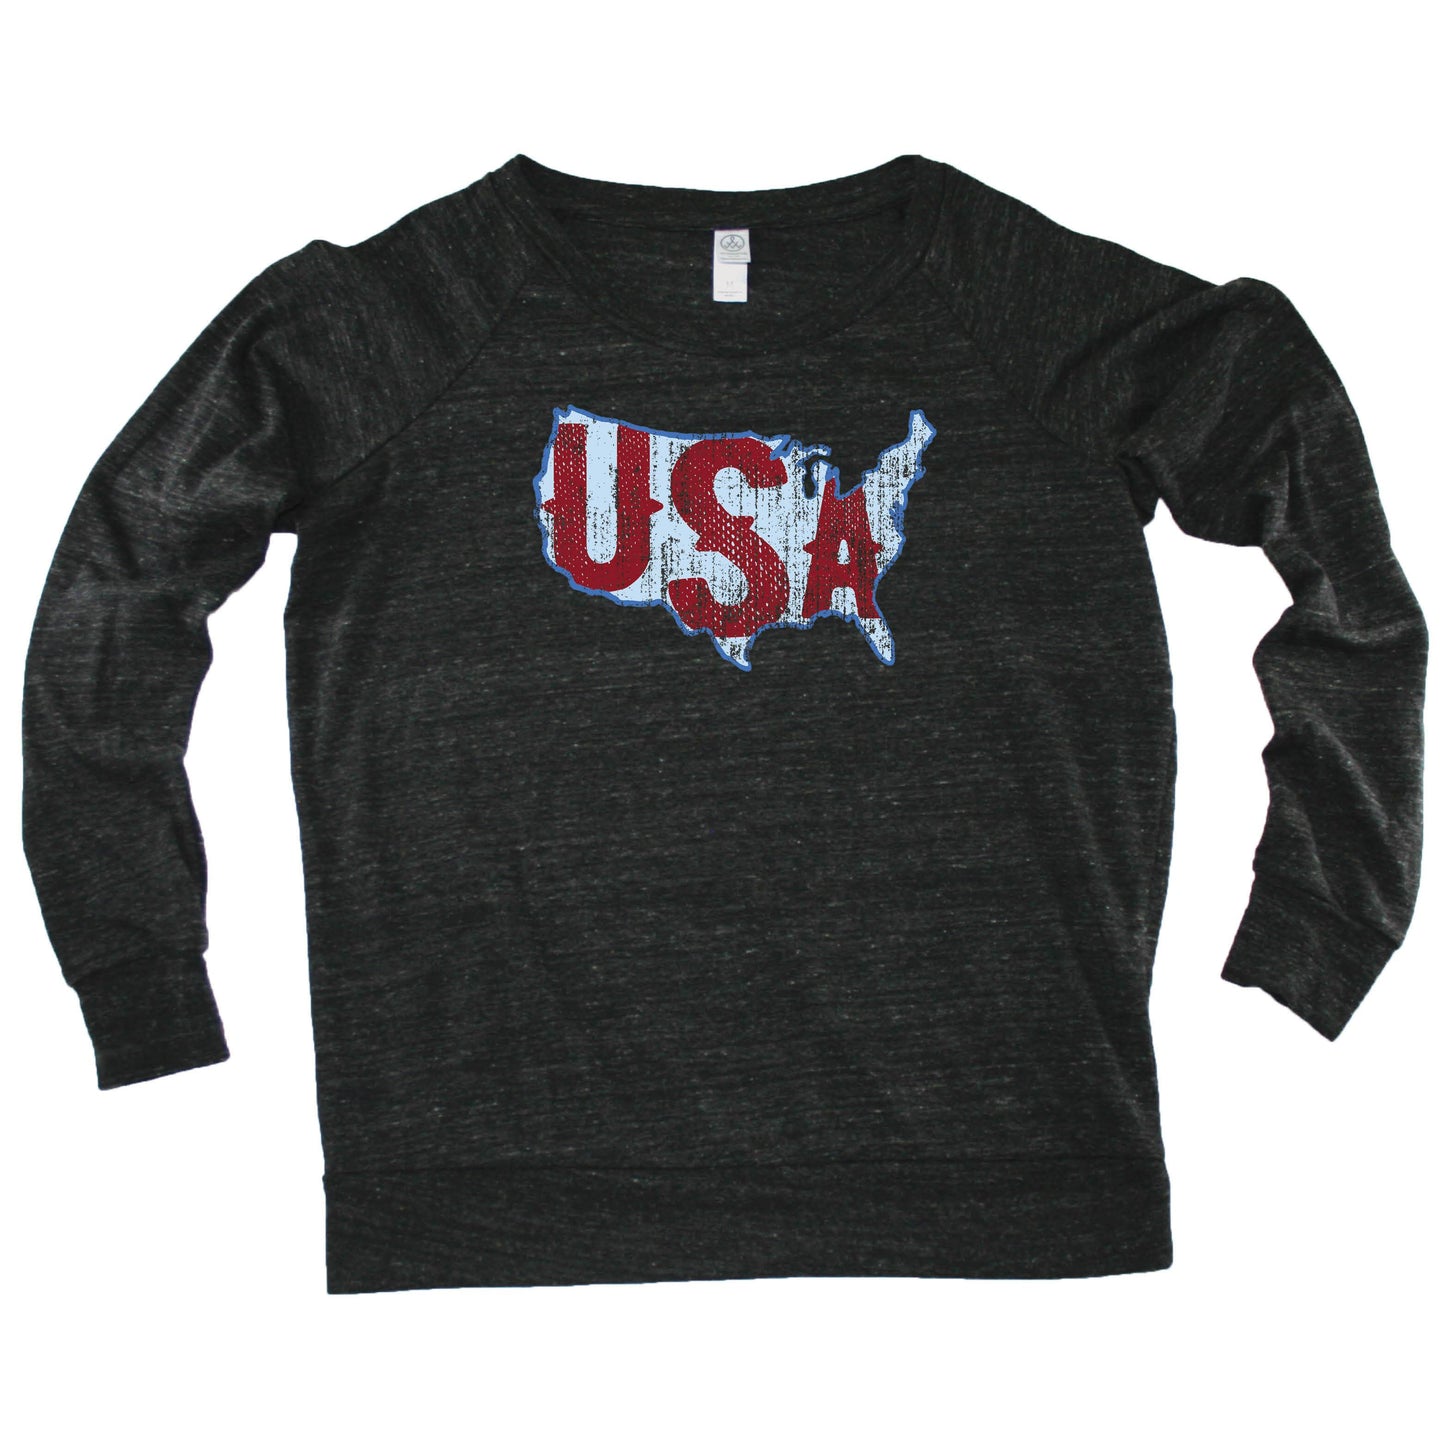 USA Vintage Map - Slouchy Top